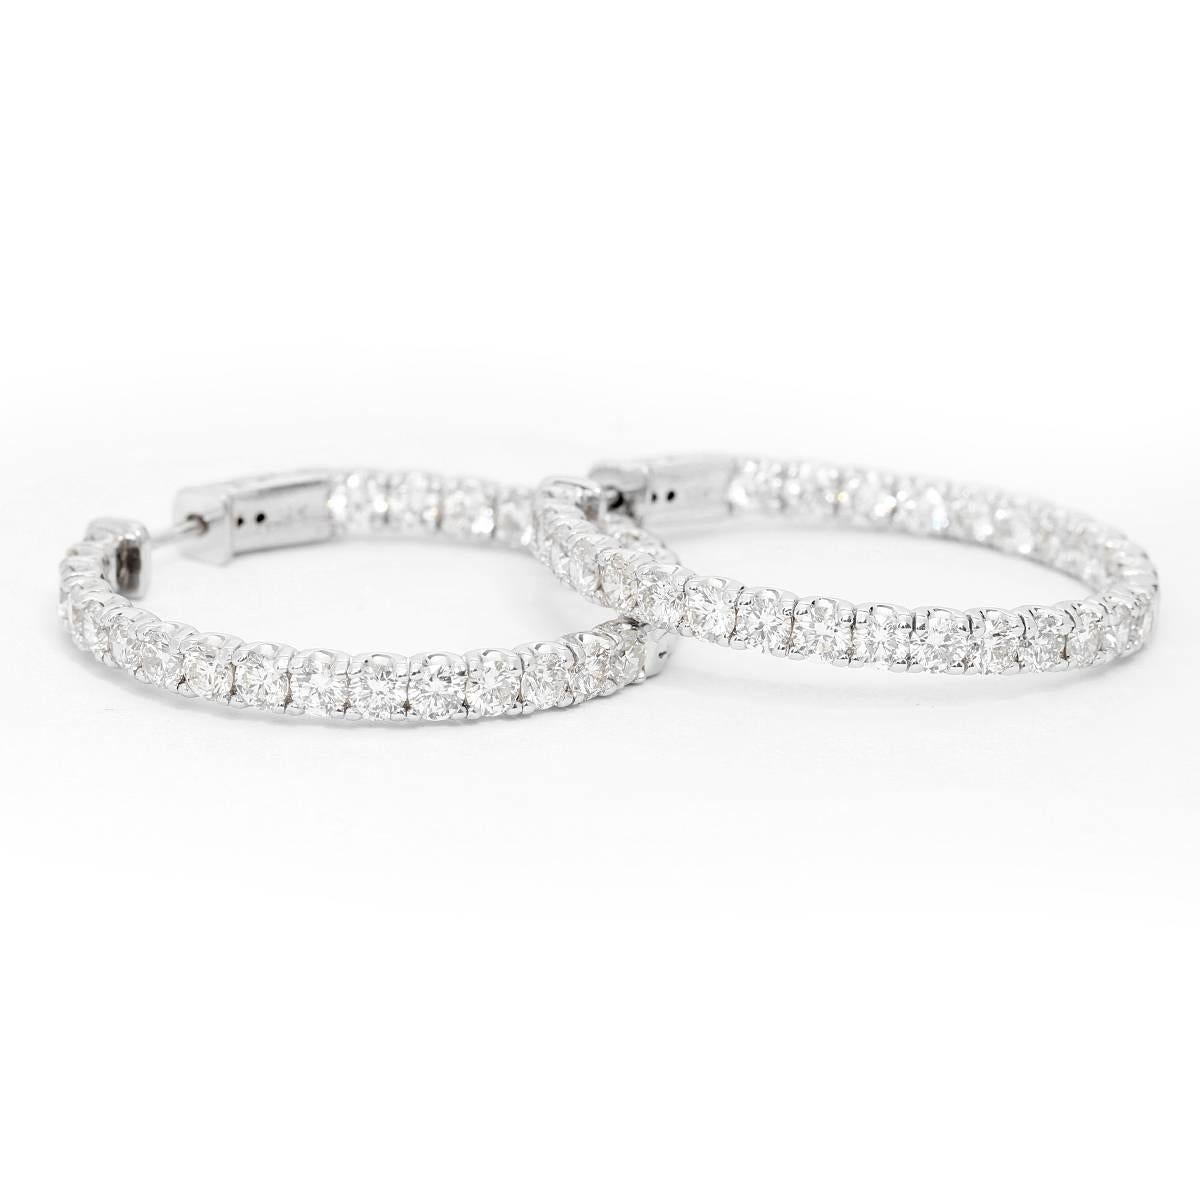 Beautiful 14k White Gold Inside-Out Diamond Hoop Earrings - . These beautiful 14k white gold hoop earrings are perfect for any occasion! The earrings feature apx. 6.2 carats of  VS2-SI1-clarity and H-I-color diamonds. Earrings measure apx. 1.5 inch